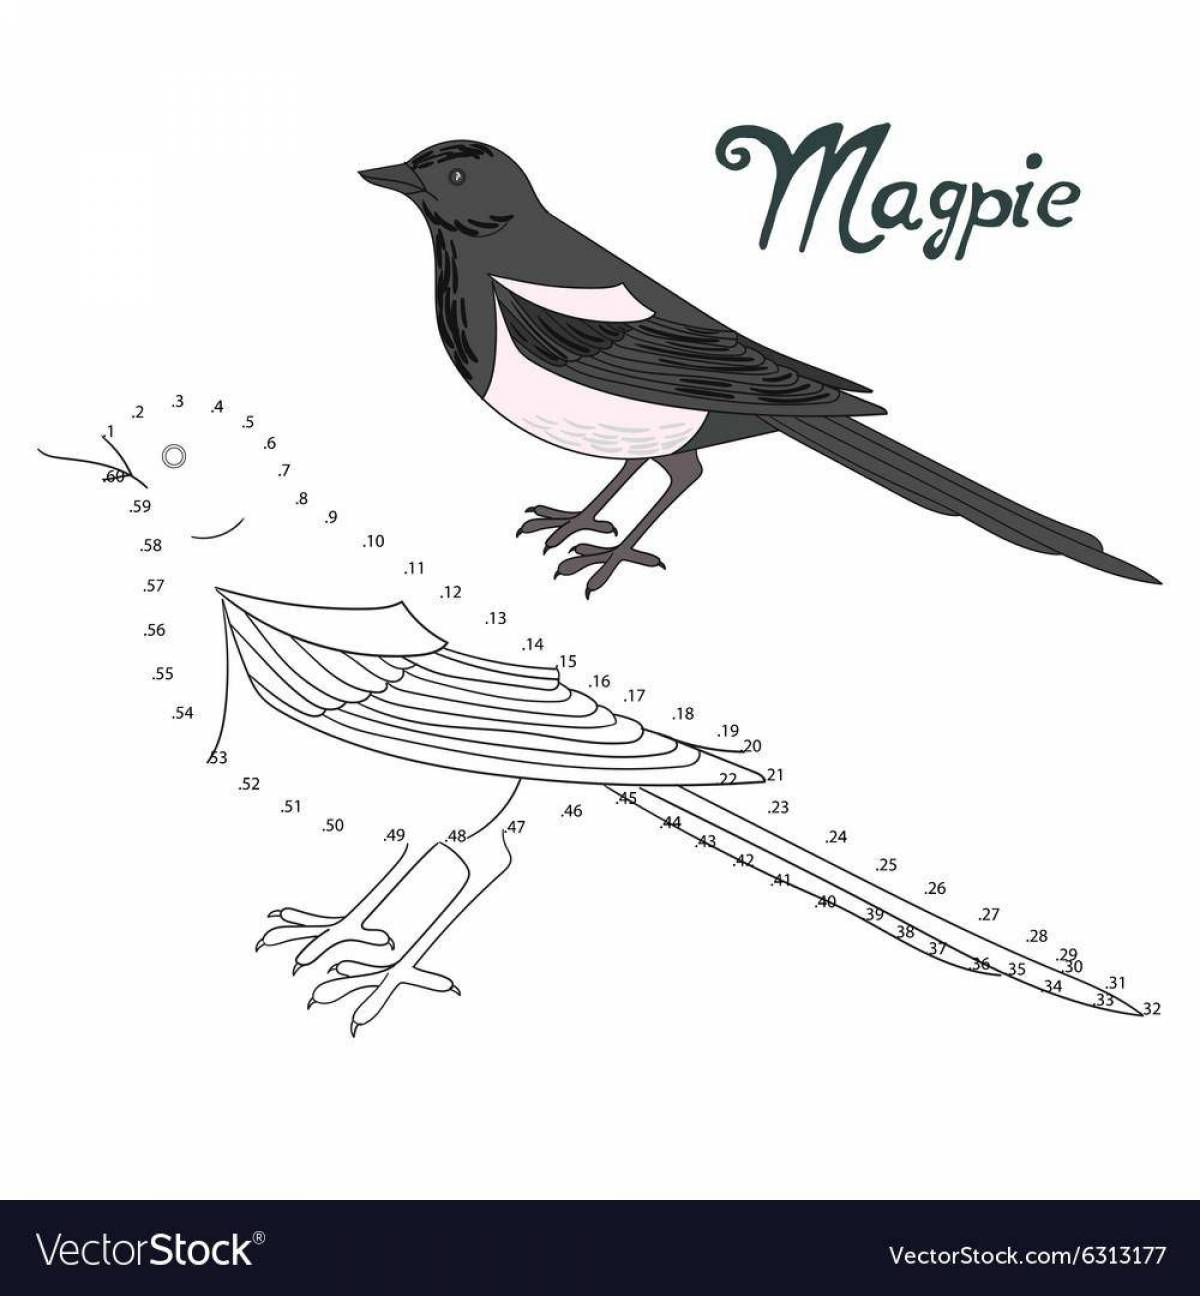 Magpie for kids #3